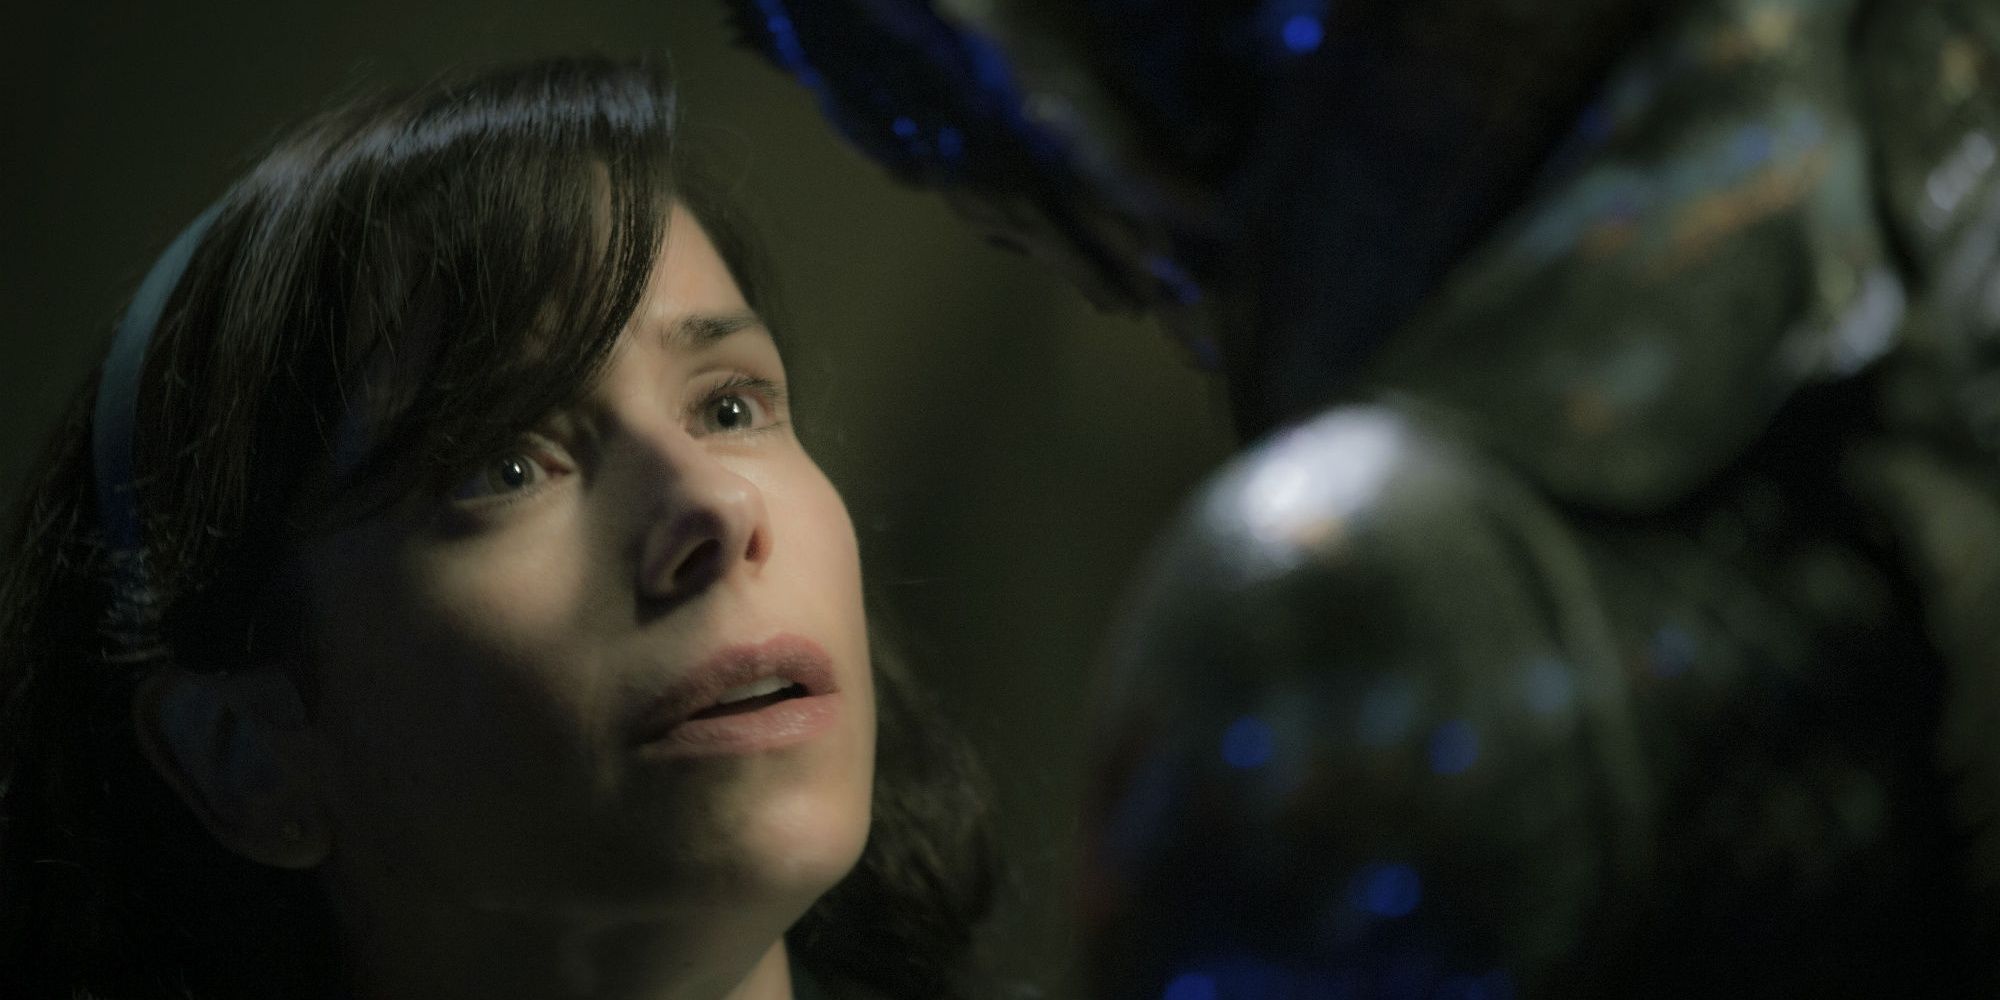 Elisa Esposito stares up at The Amphibian Man in The Shape of Water